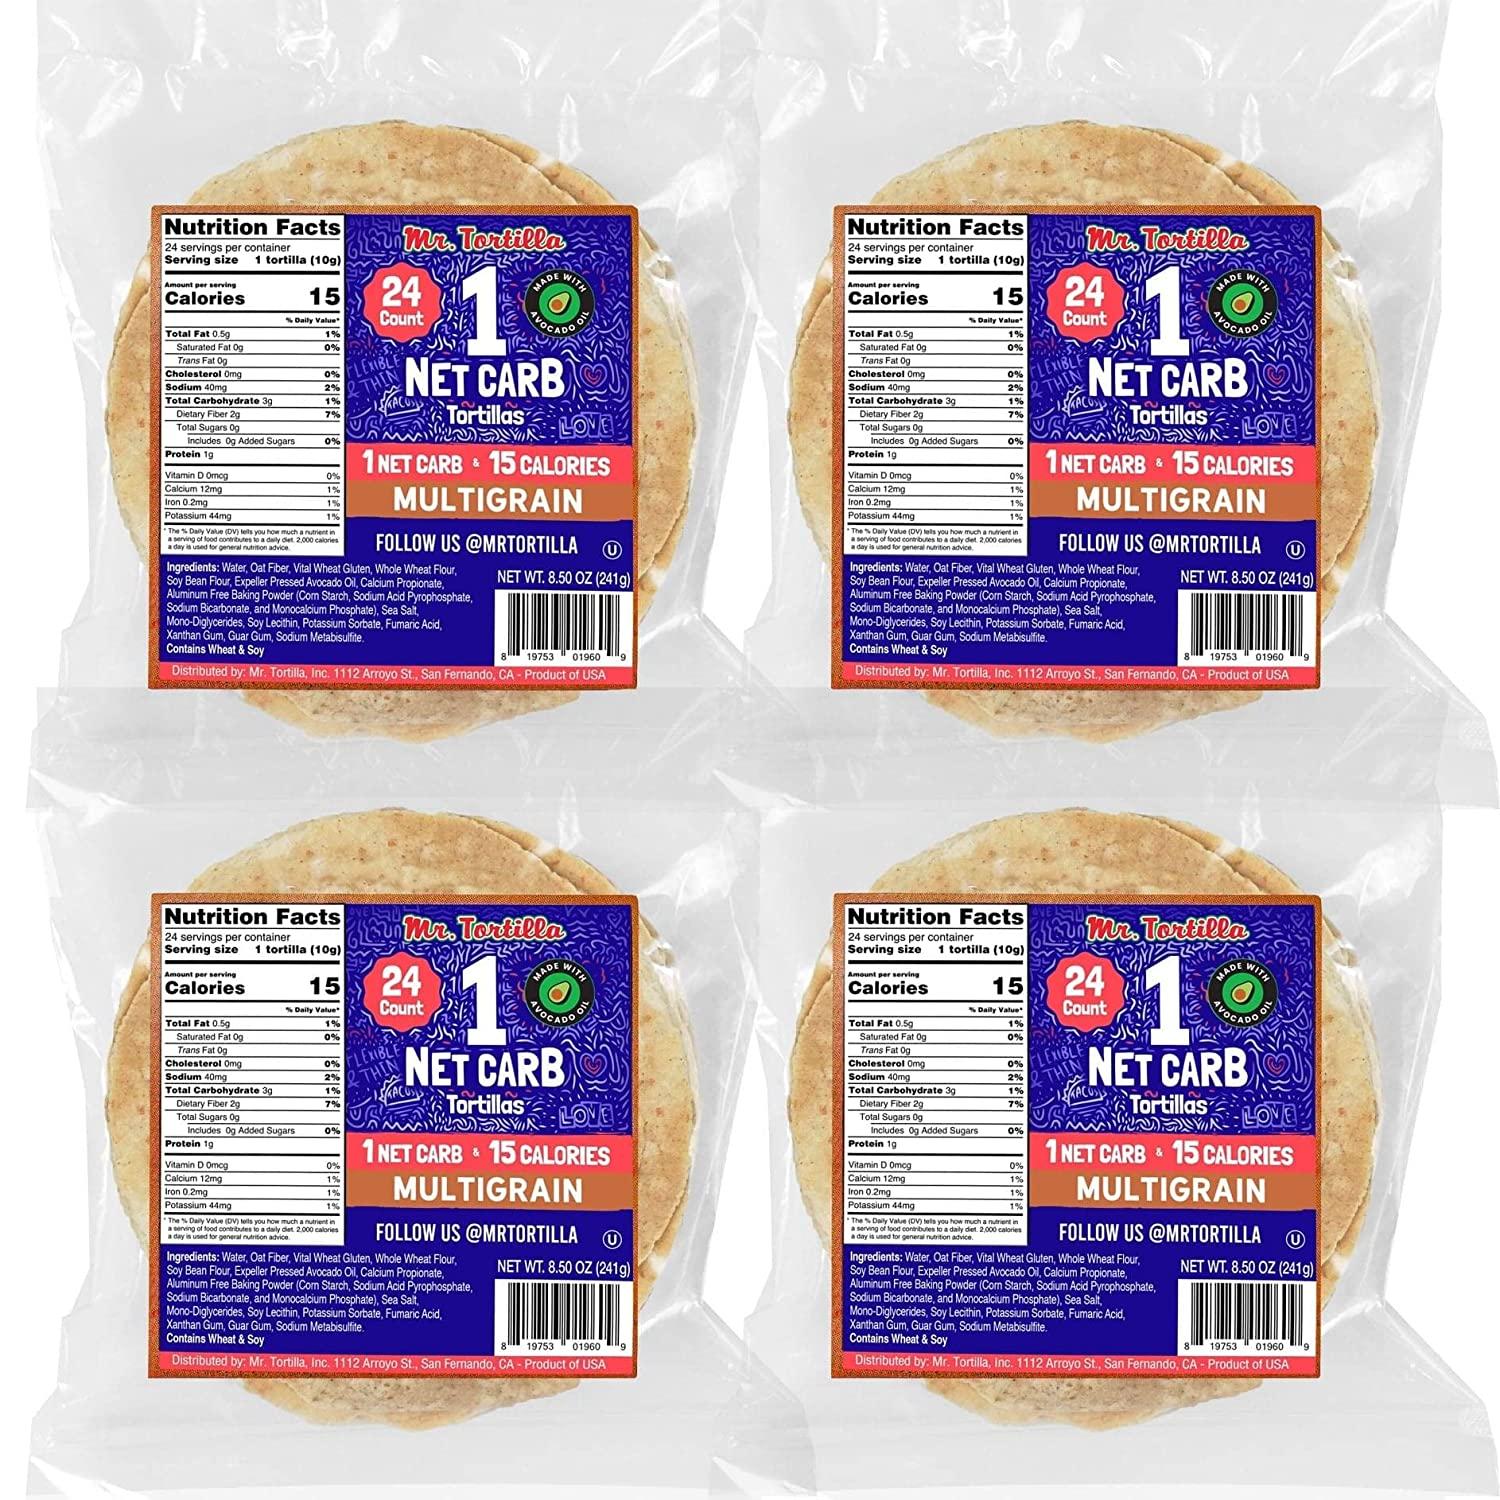 Mr Tortilla Low Carb Tortilla Wraps 96 Pack for $14.89 Shipped